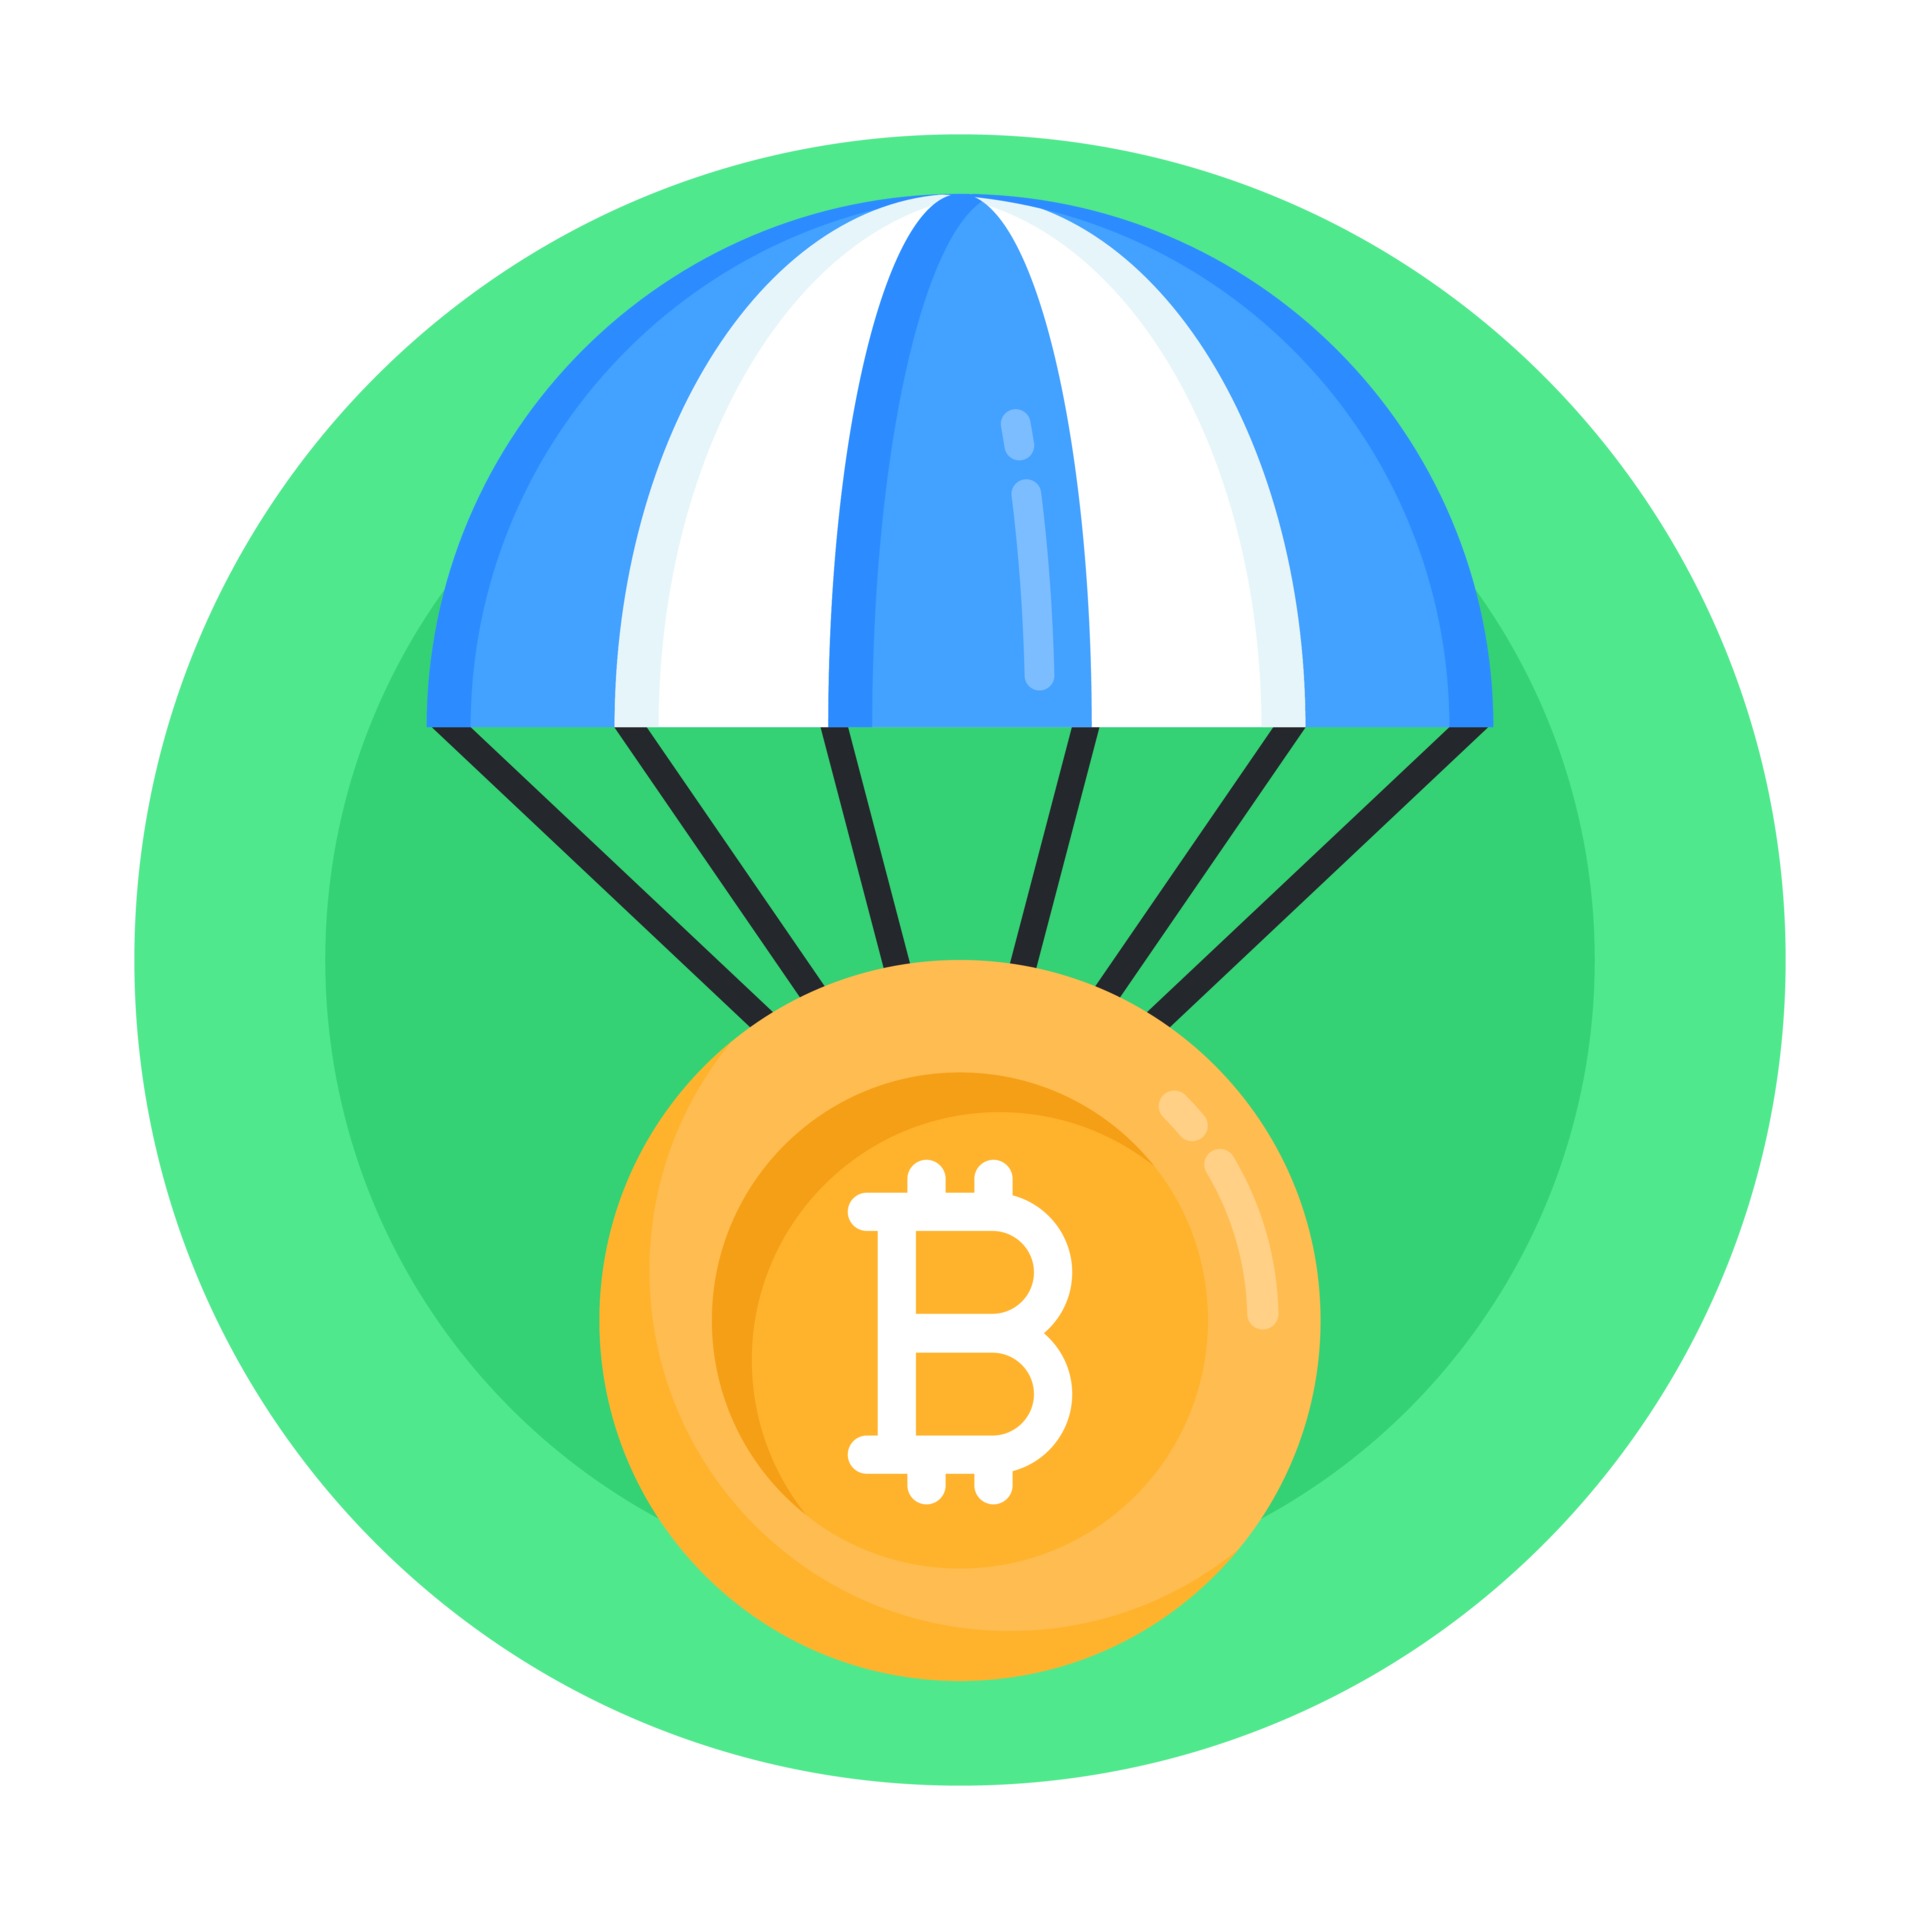 Bit Rocket Airdrop - Claim free $BRKE tokens with cryptolove.fun